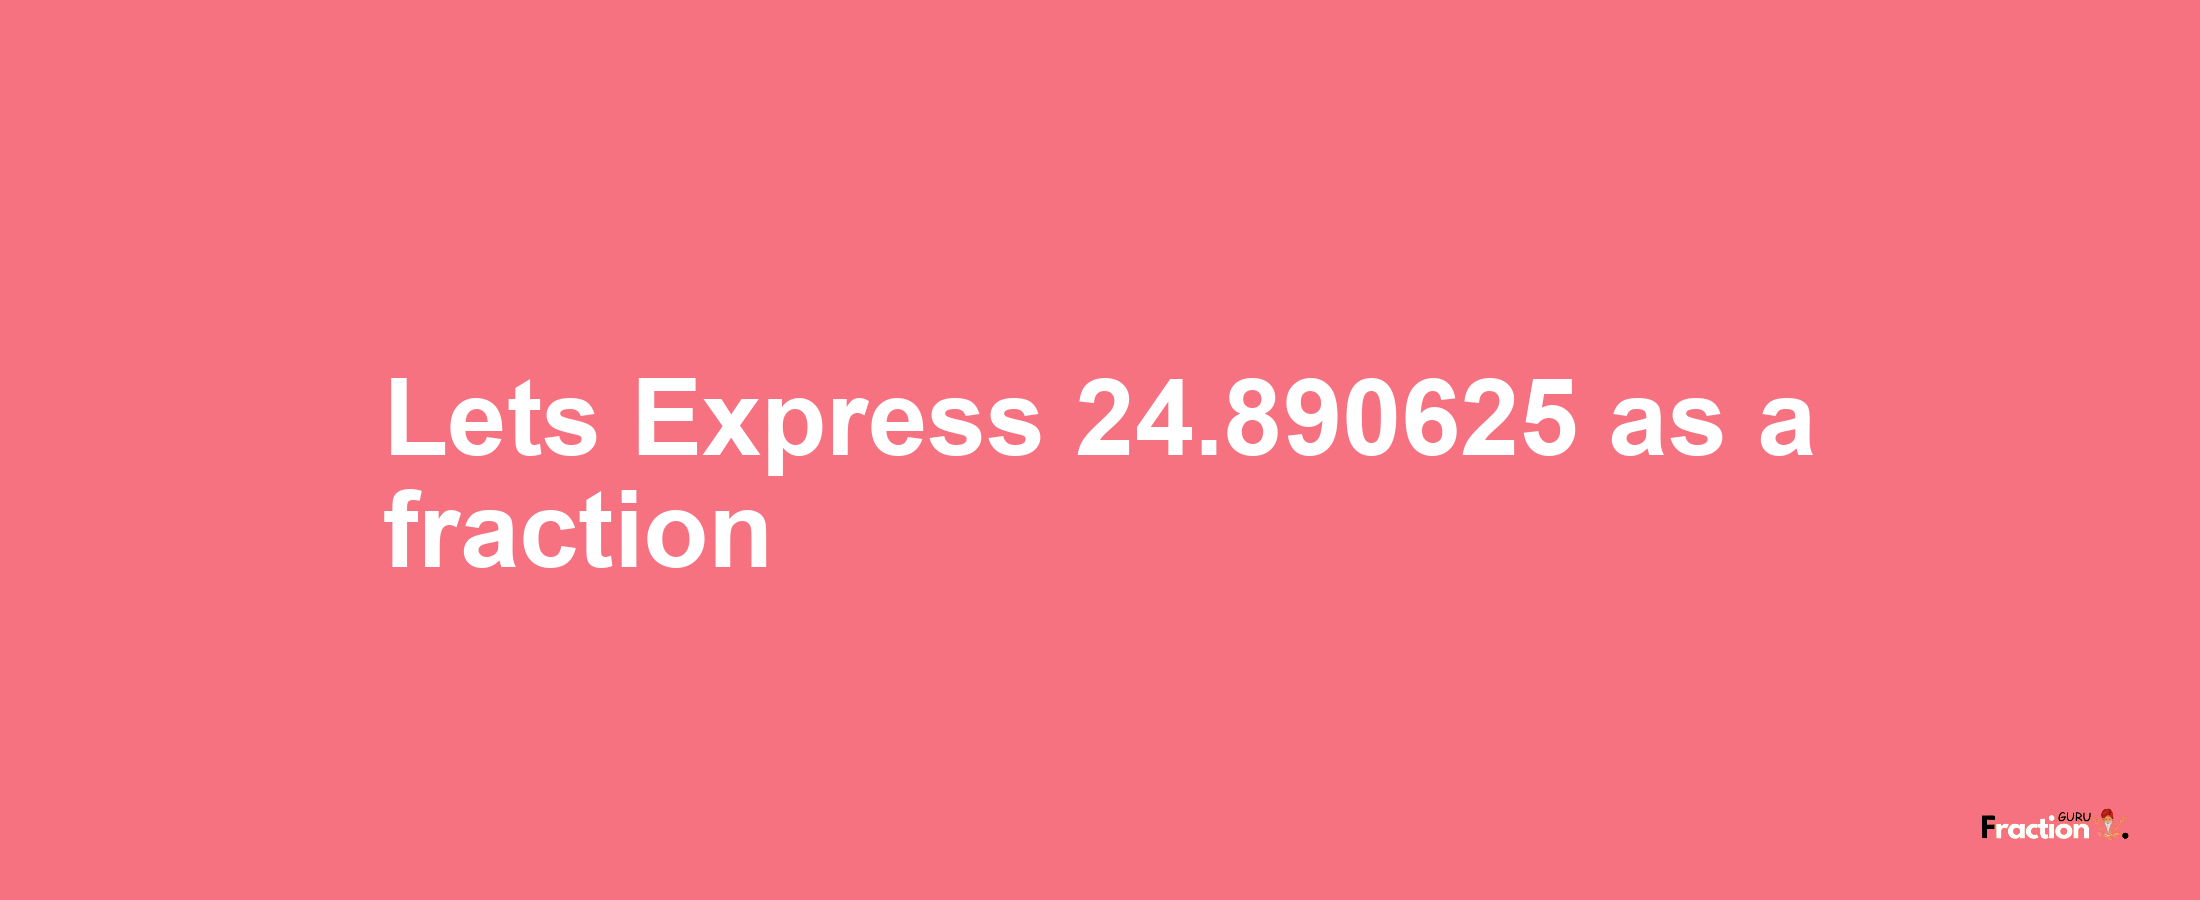 Lets Express 24.890625 as afraction